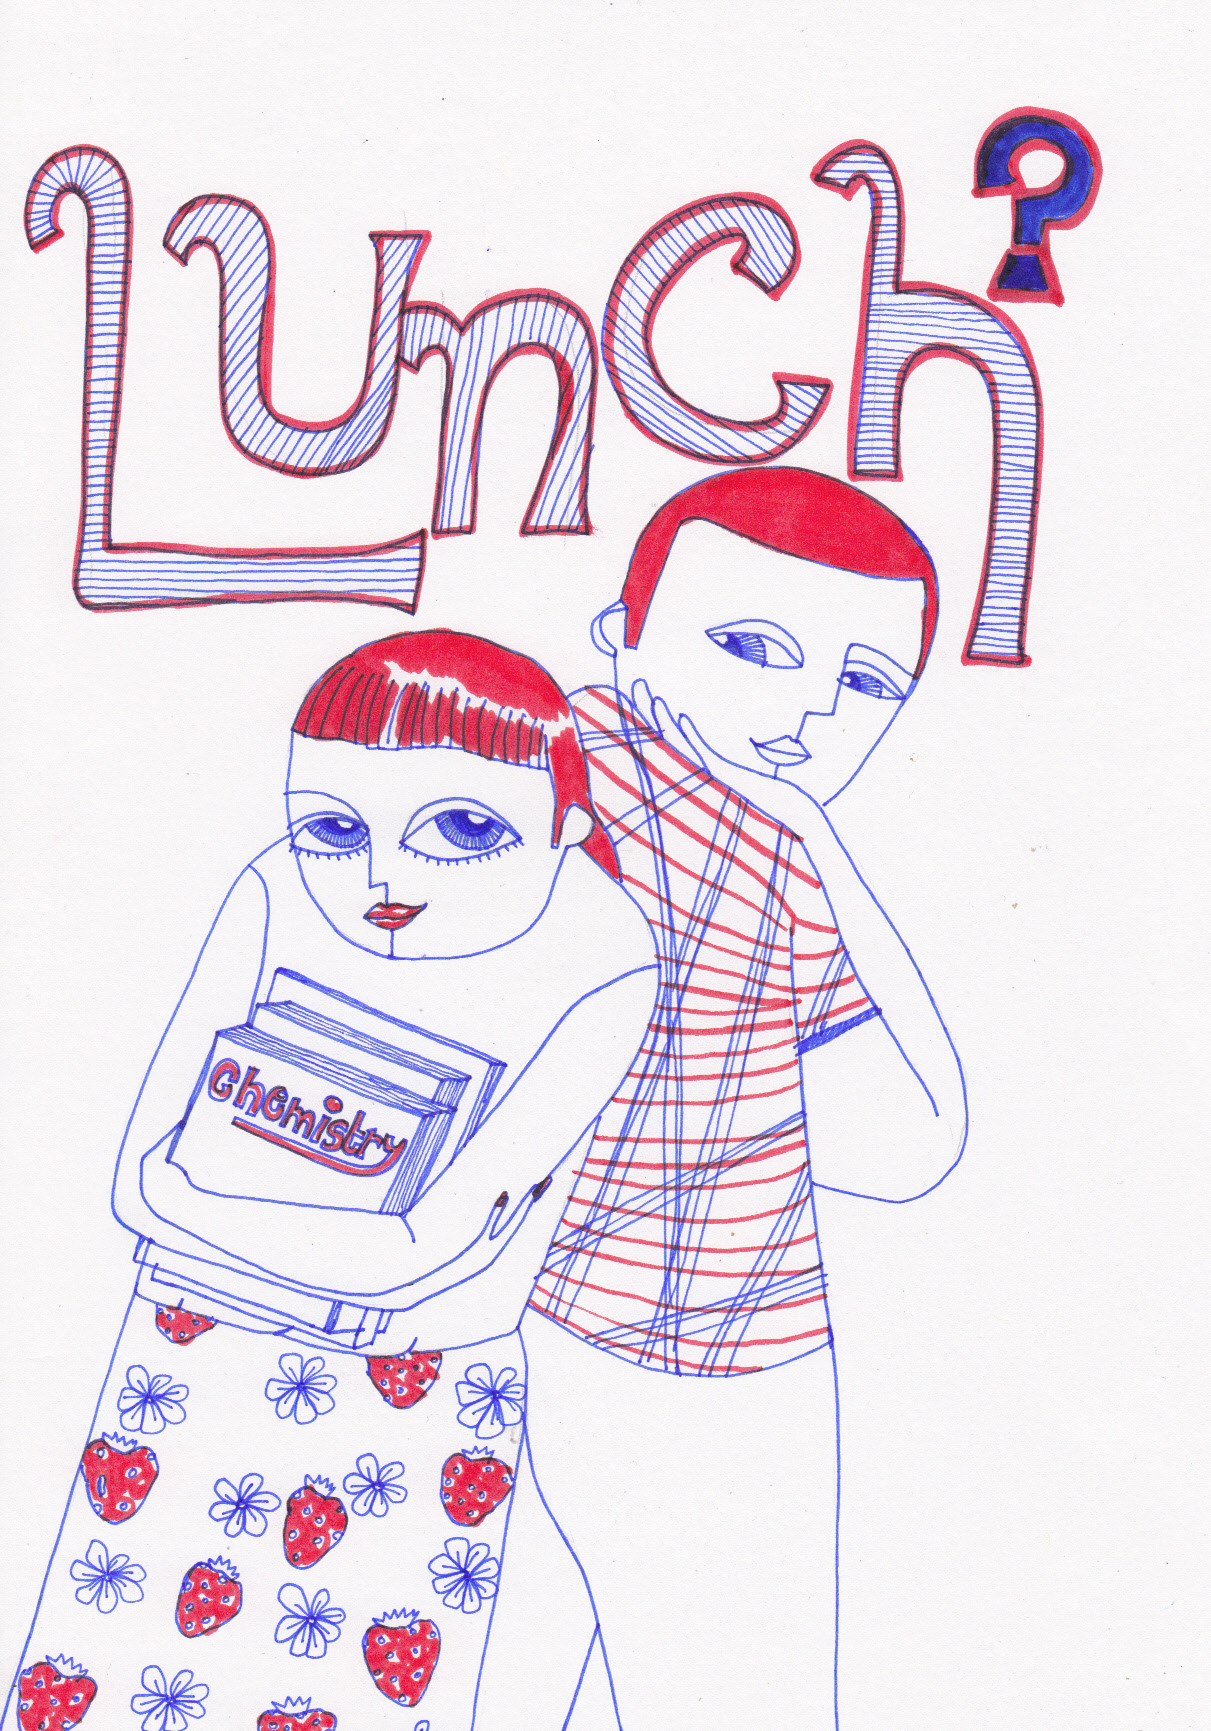 ‘Strawberry Crush’ &lt;by mivoh&gt; College pre-interview assignment: Illustrate the theme ‘Lunch’.